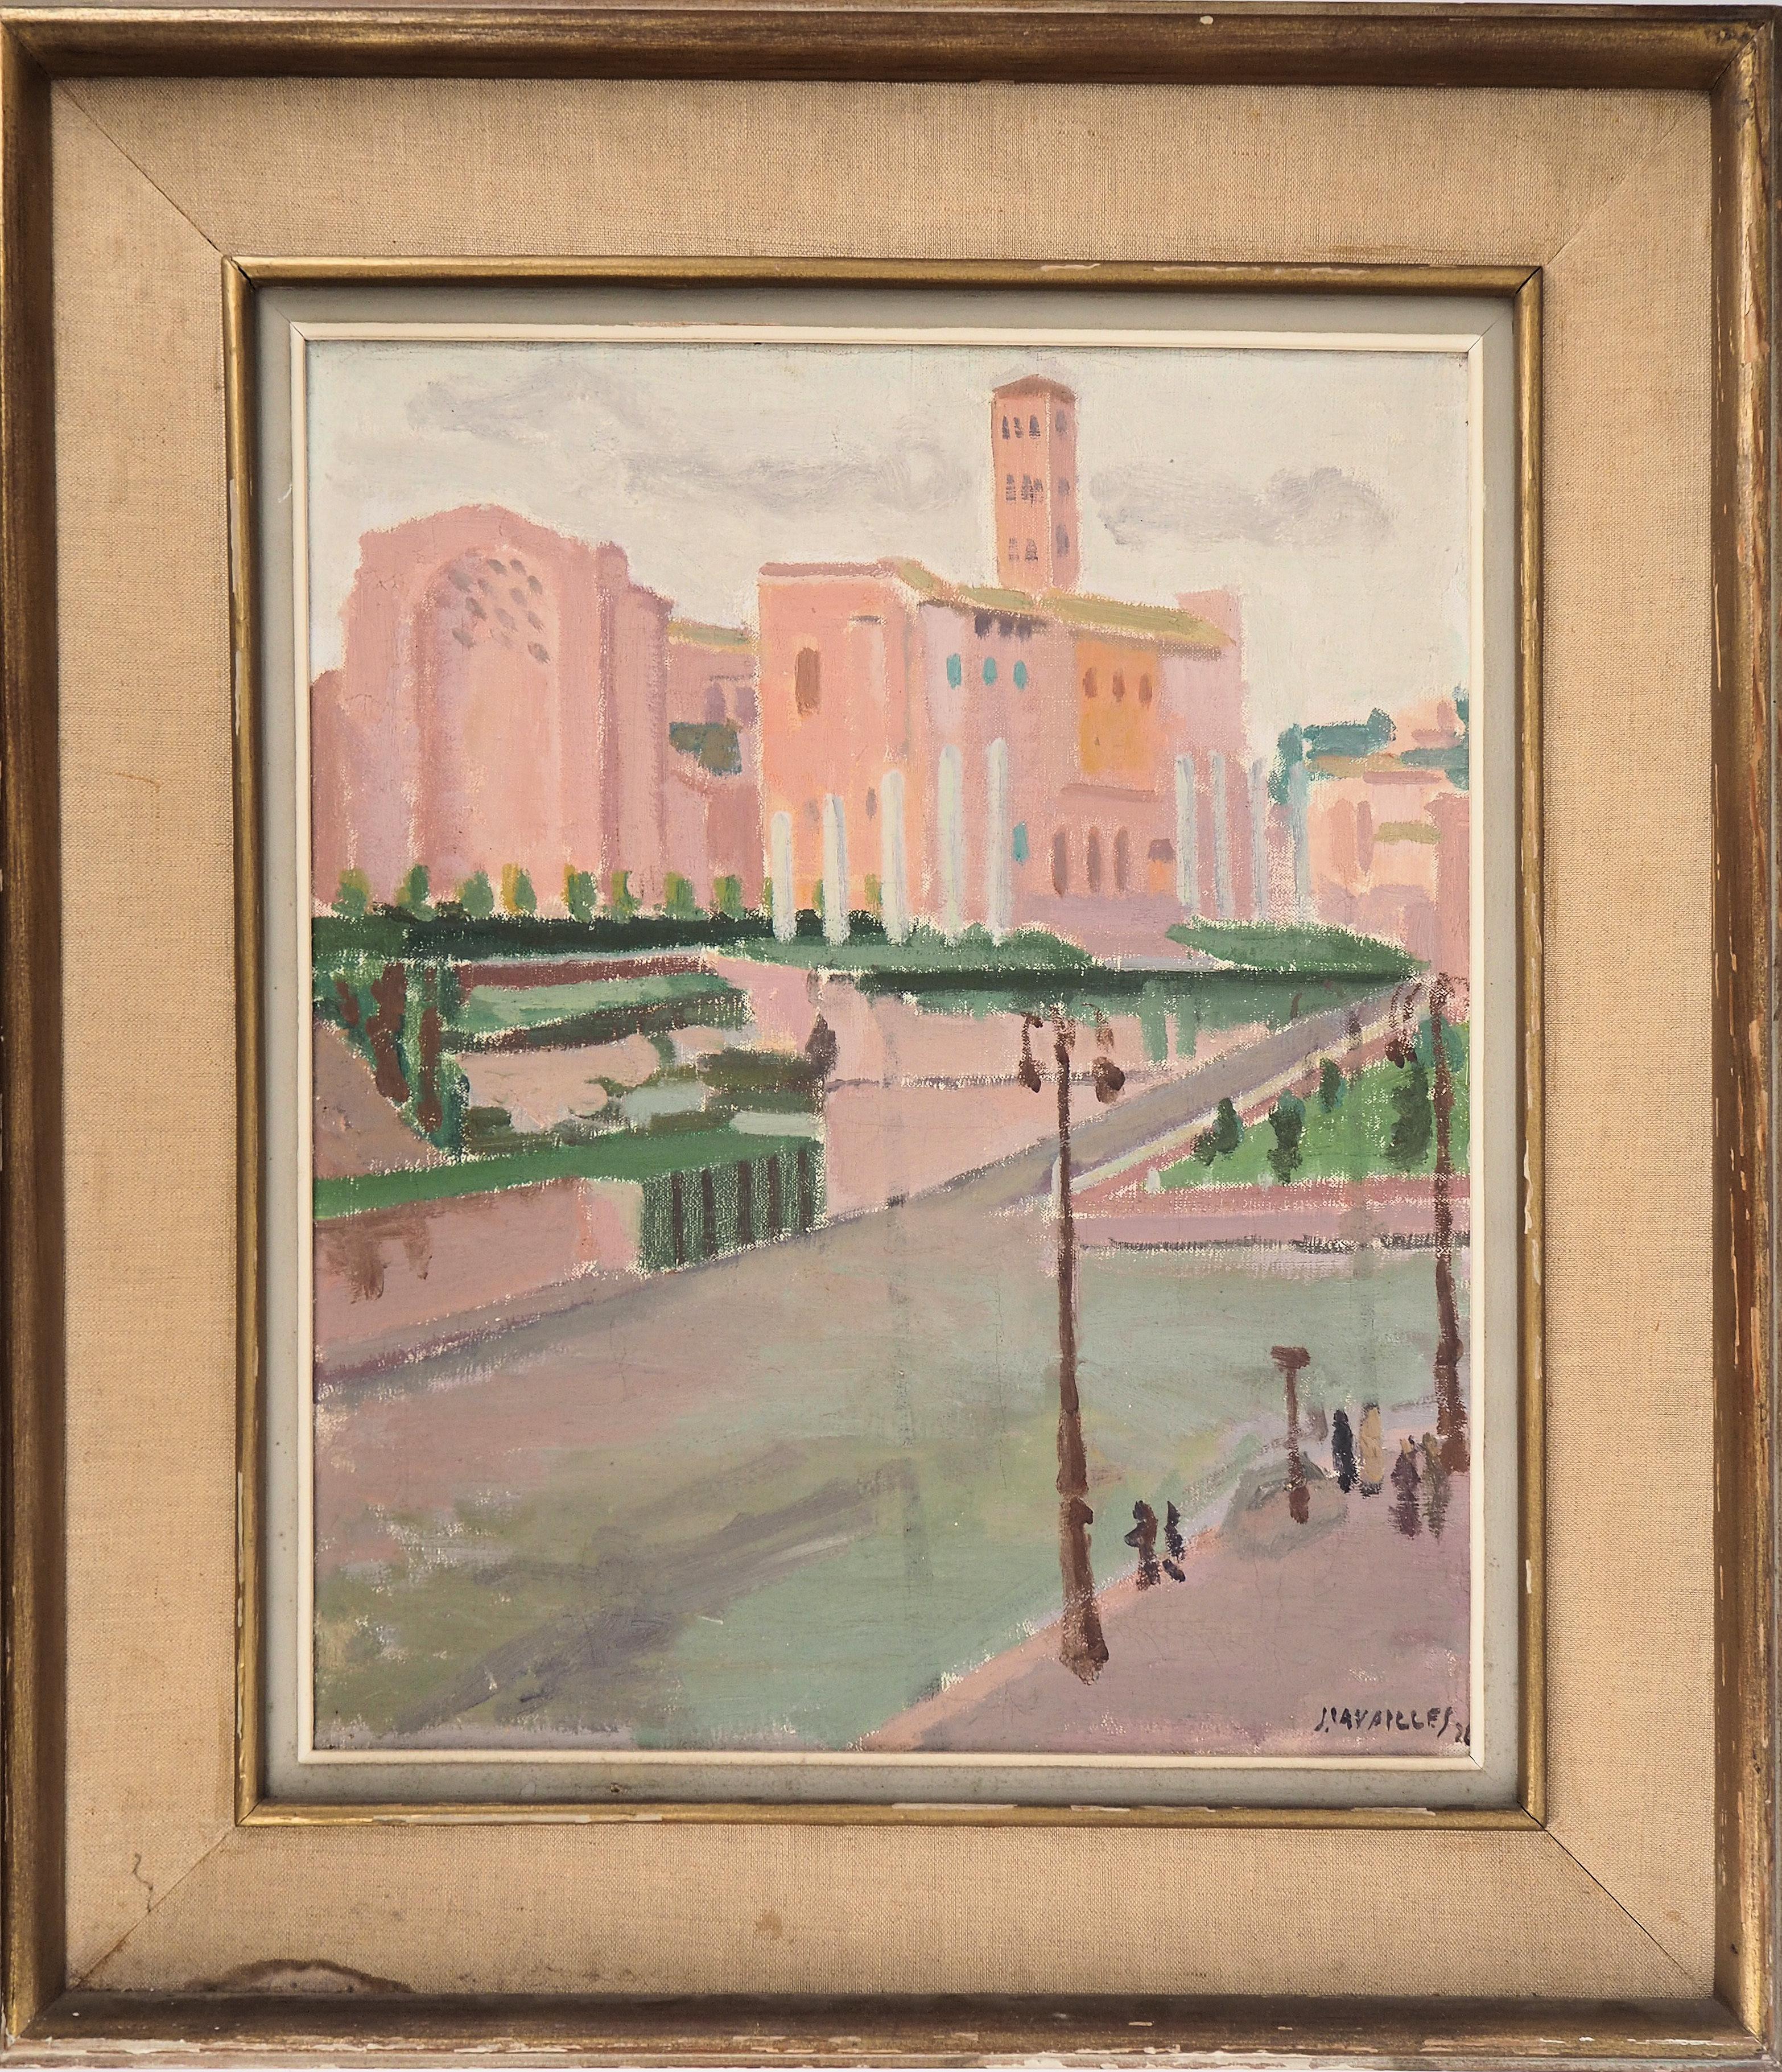 Jules Cavailles Landscape Painting - Rome, The Forum Seen From the Colosseum - Original Oil on canvas, Signed